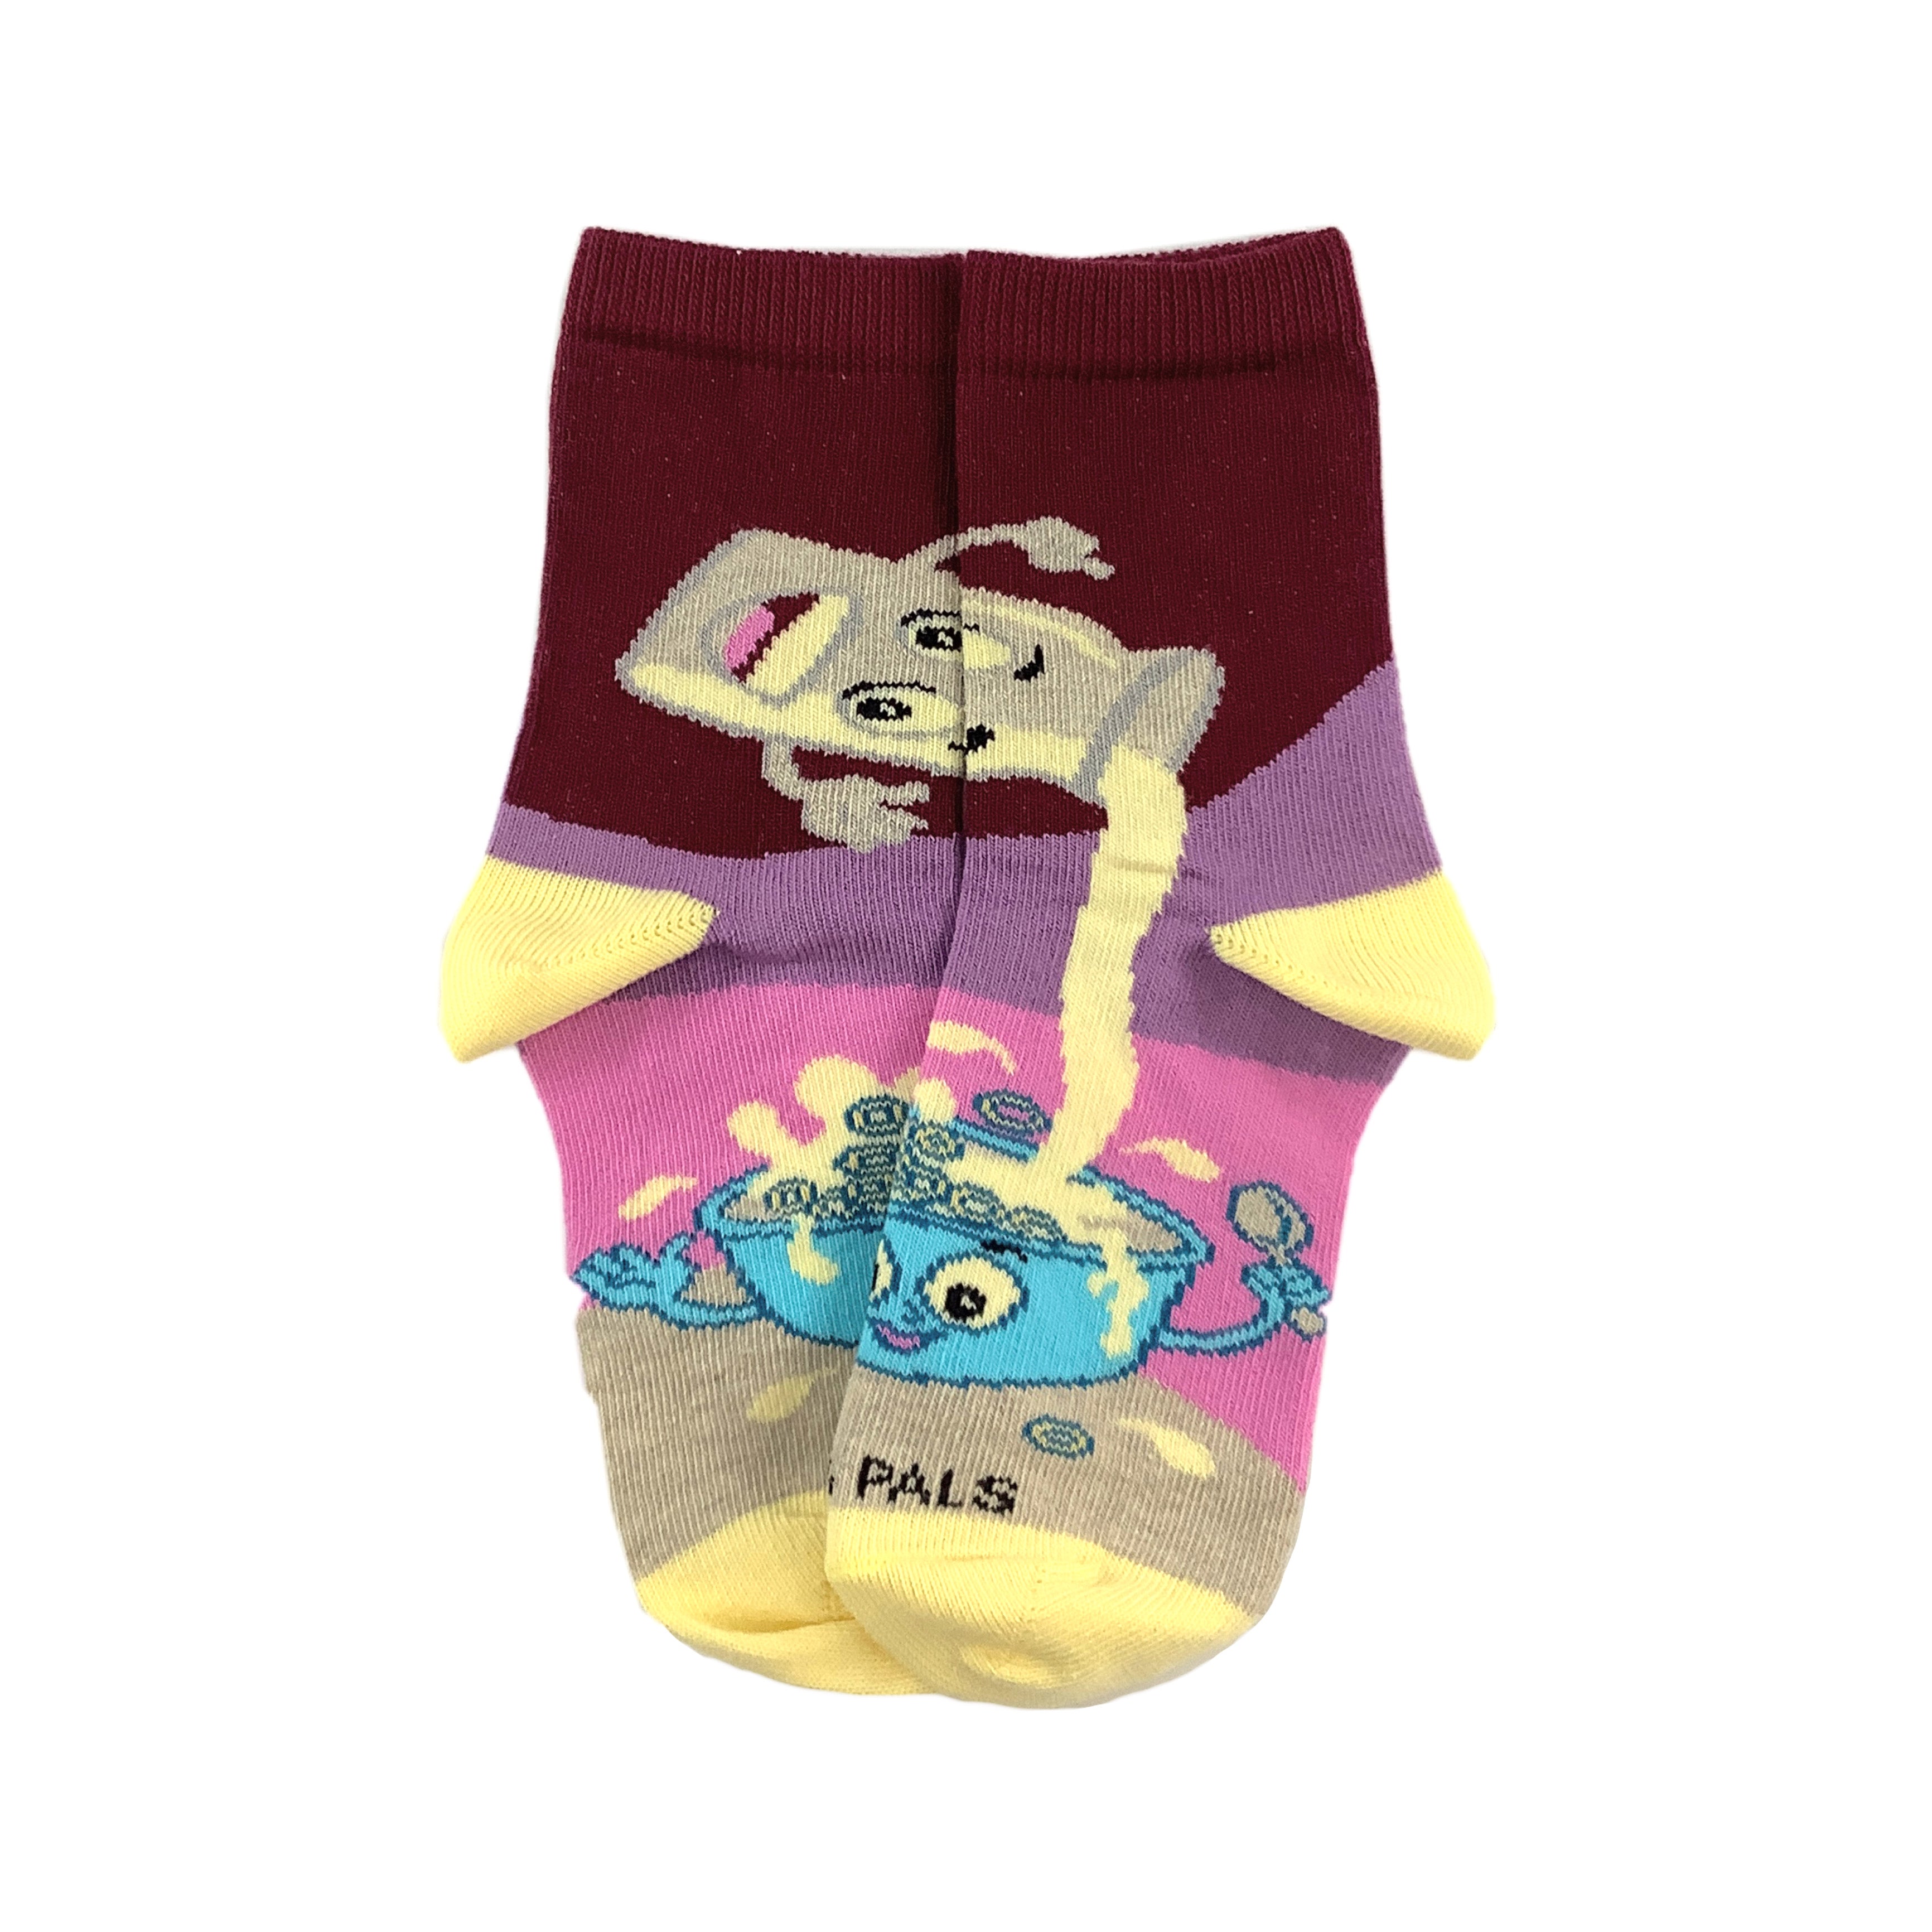 Breakfast Food Socks from the Sock Panda (Set of Two) (Ages 3-7)